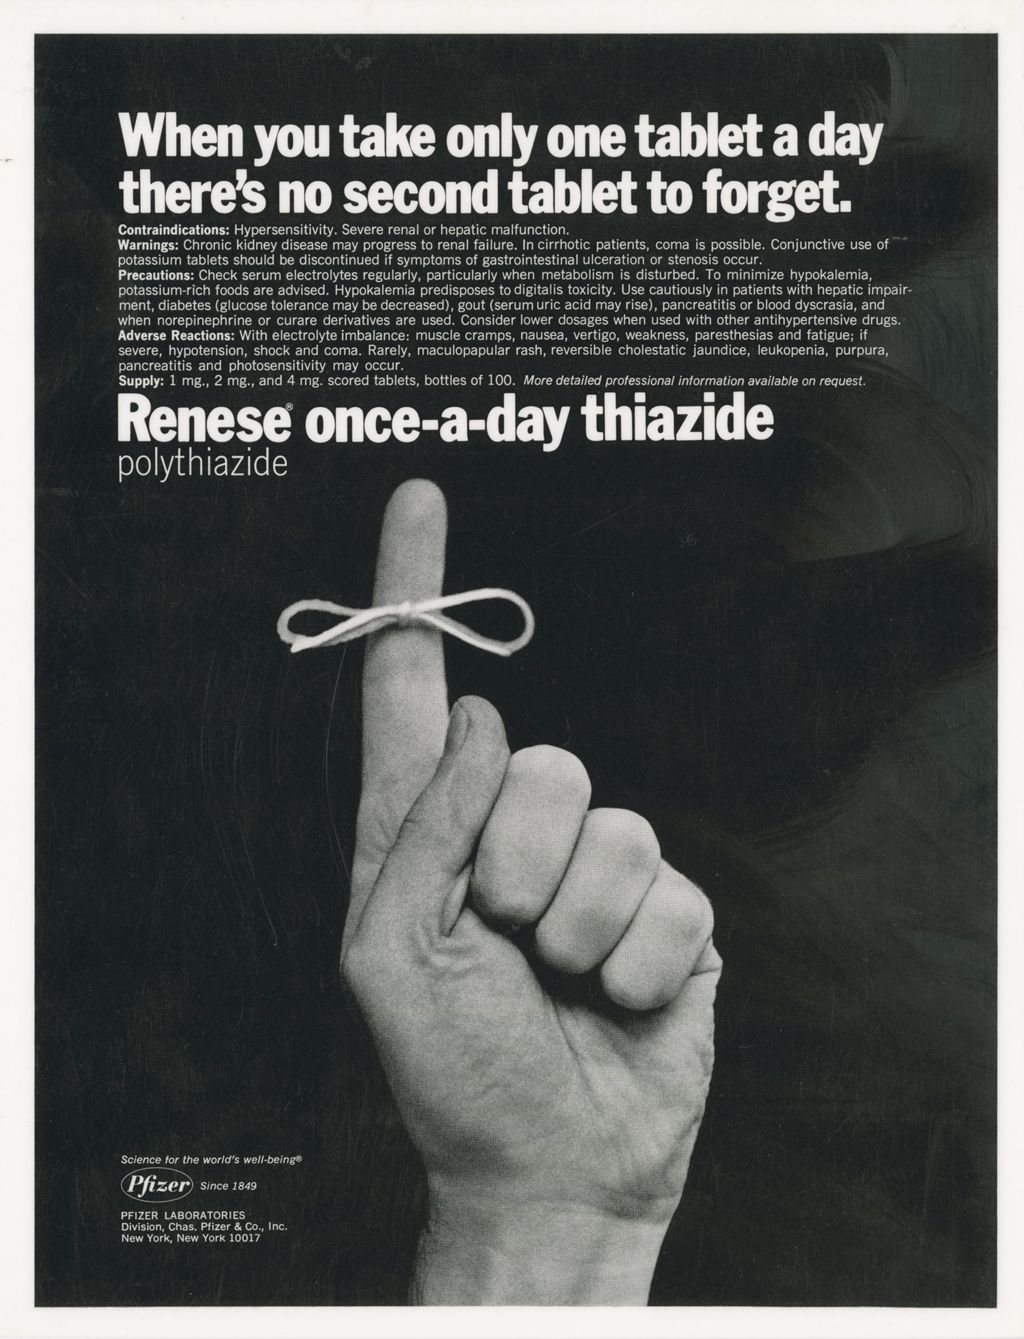 Advertisement for Renese once-a-day thiazide